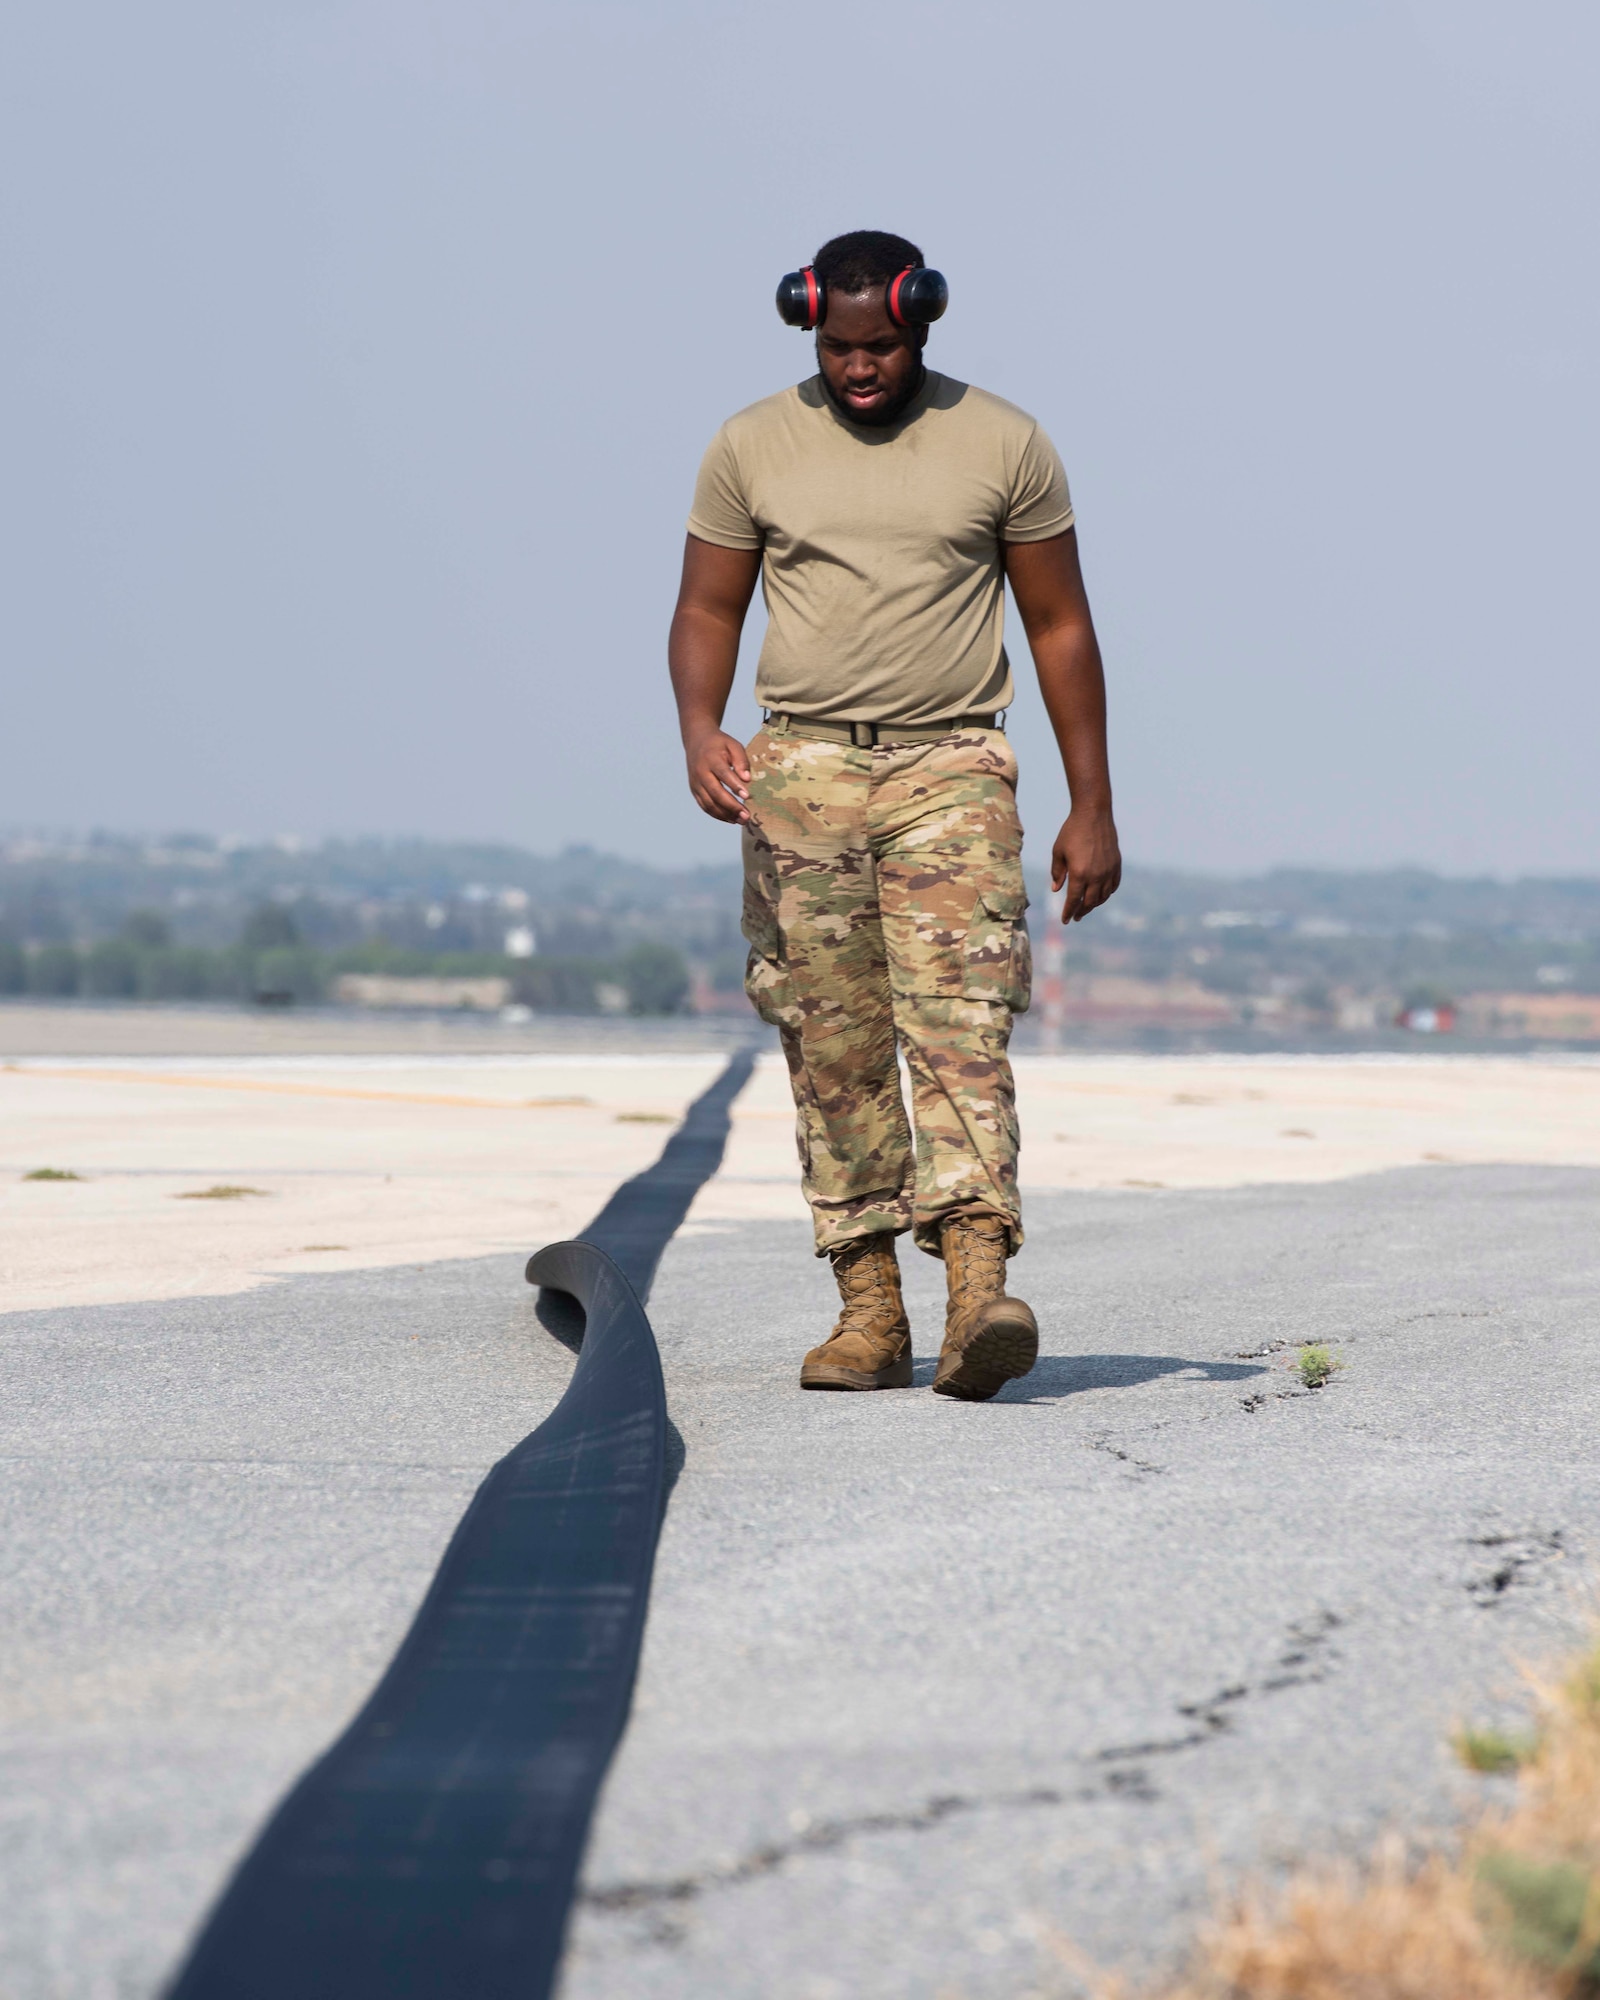 A man walks along an outstretched cable that stretches across a runway